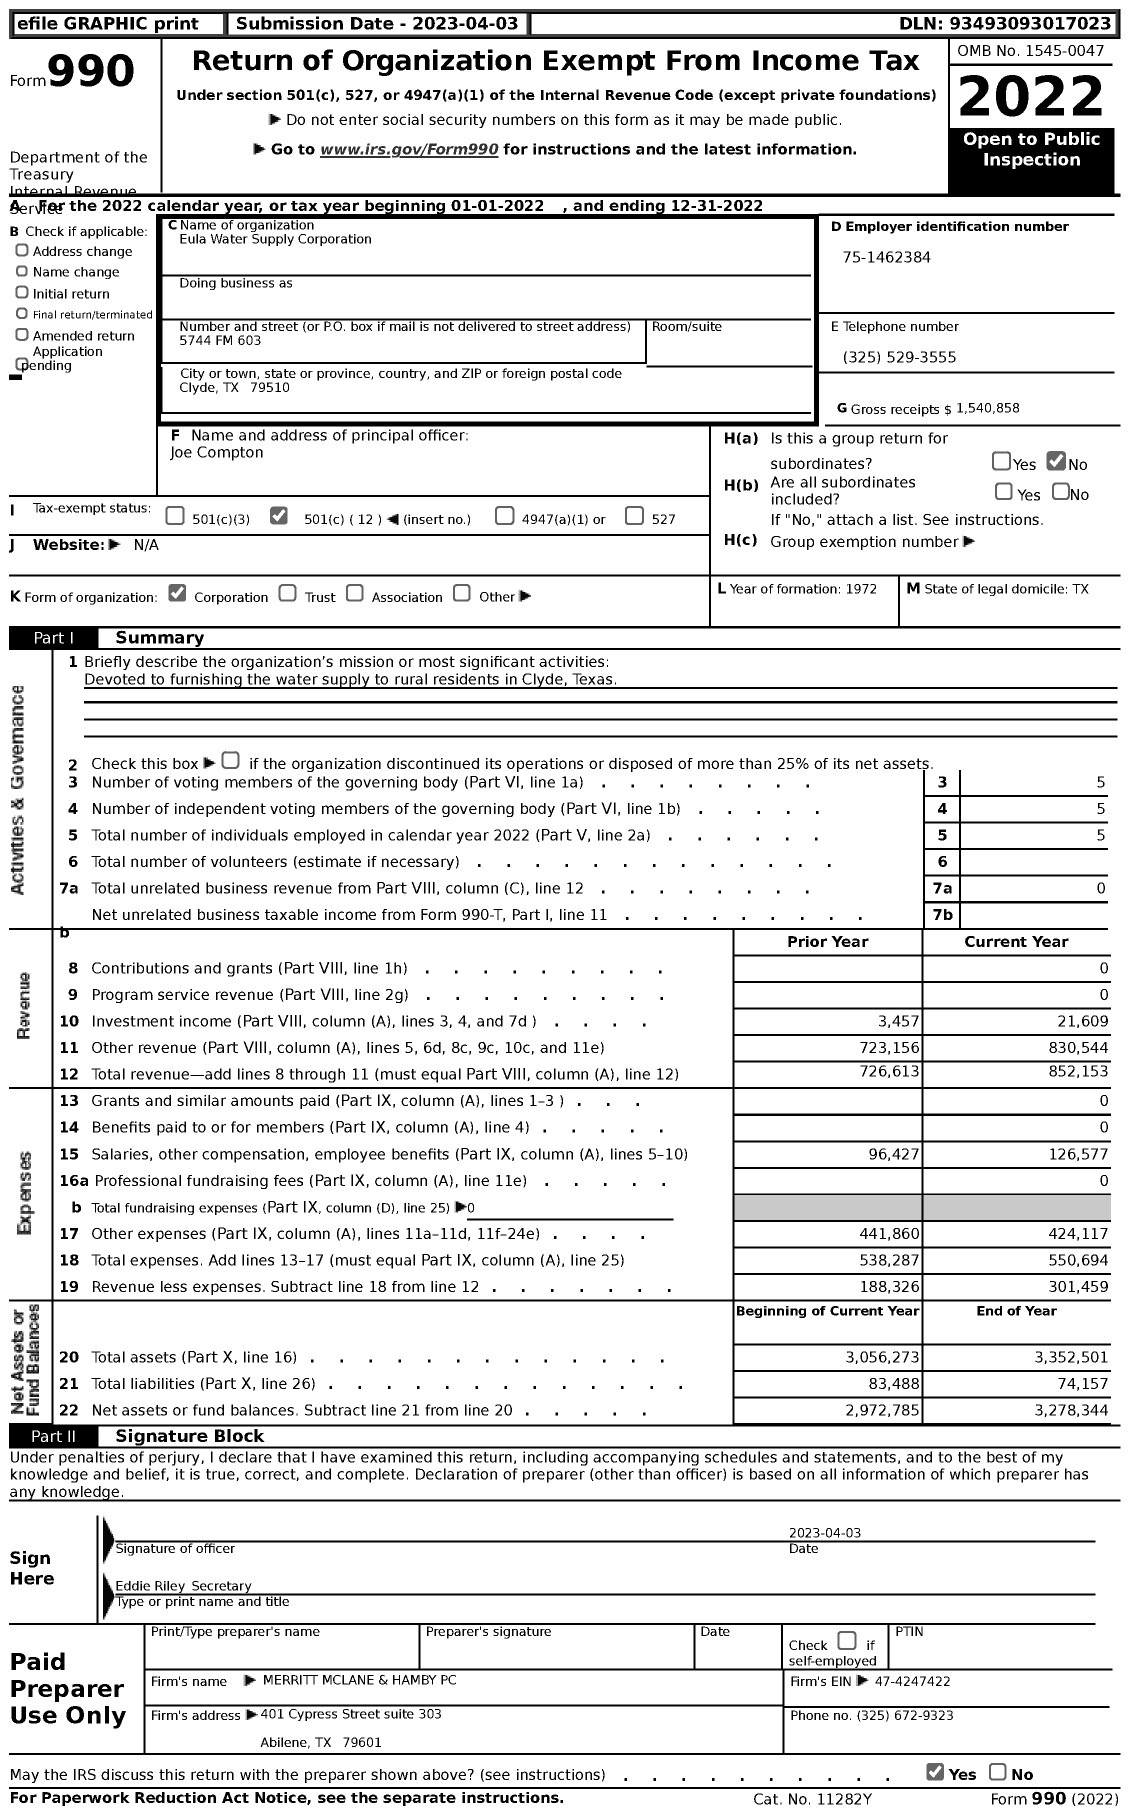 Image of first page of 2022 Form 990 for Eula Water Supply Corporation